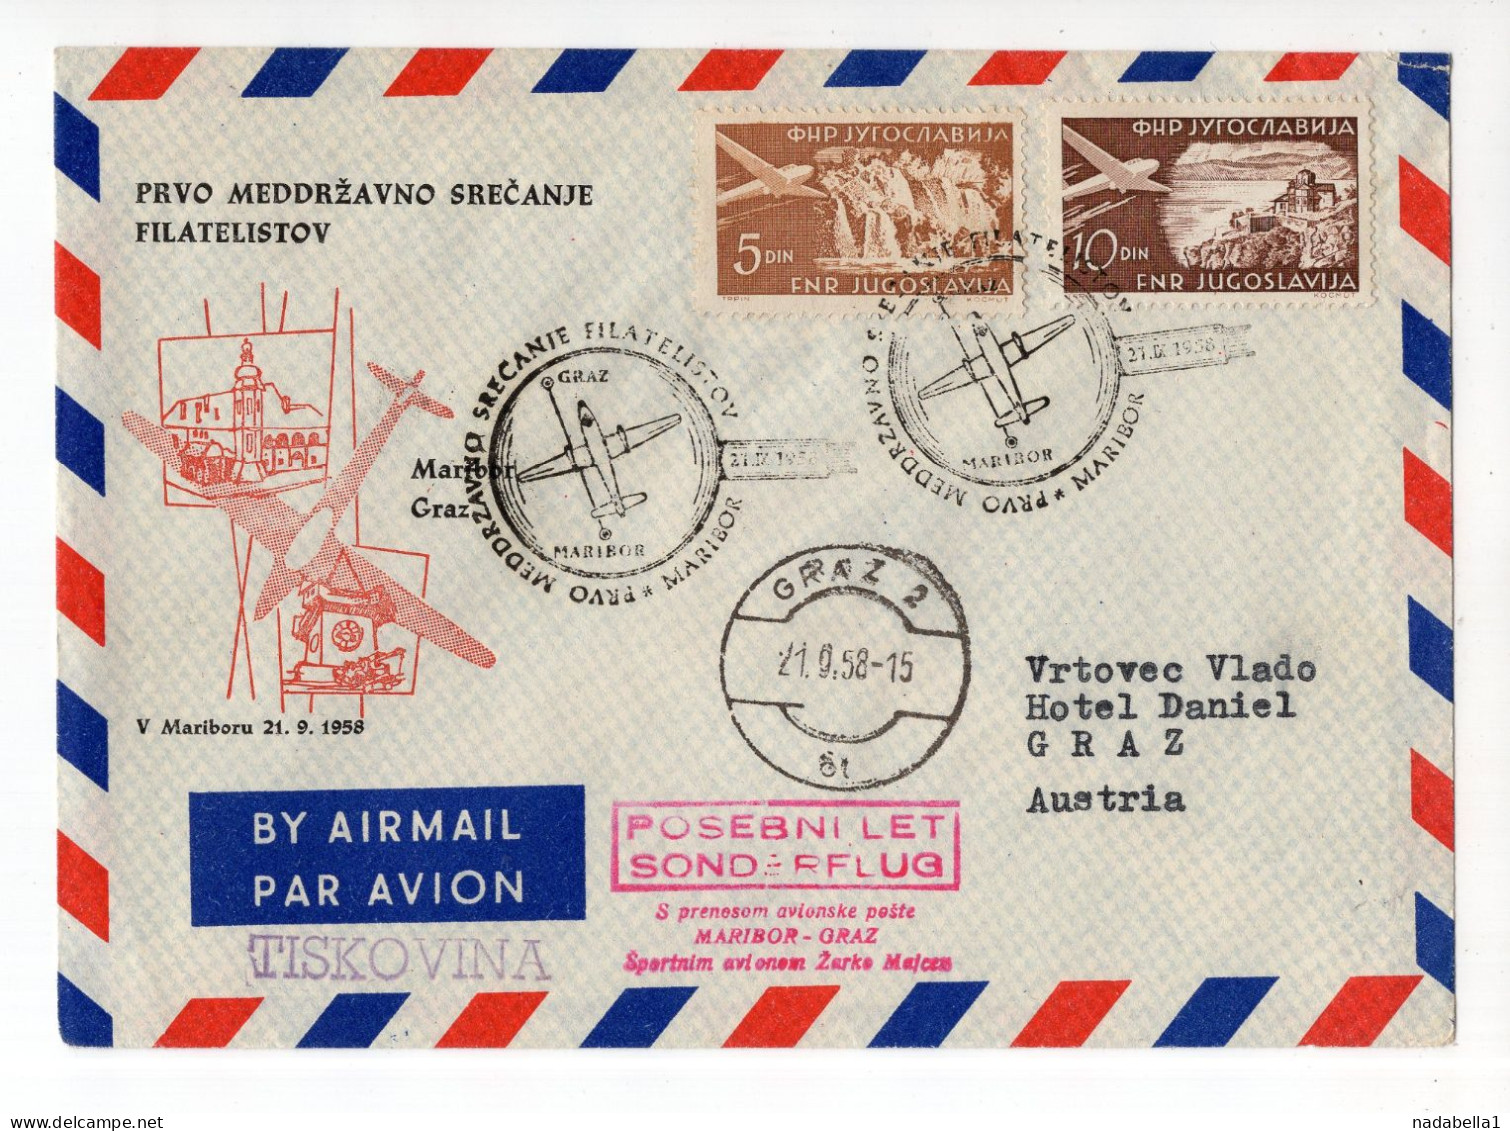 1958. YUGOSLAVIA,SLOVENIA,MARIBOR,AIRMAIL,SPECIAL COVER & CANCELLATION: FIRST INTERNATIONAL STAMP EXHIBITION,TO AUSTRIA - Airmail